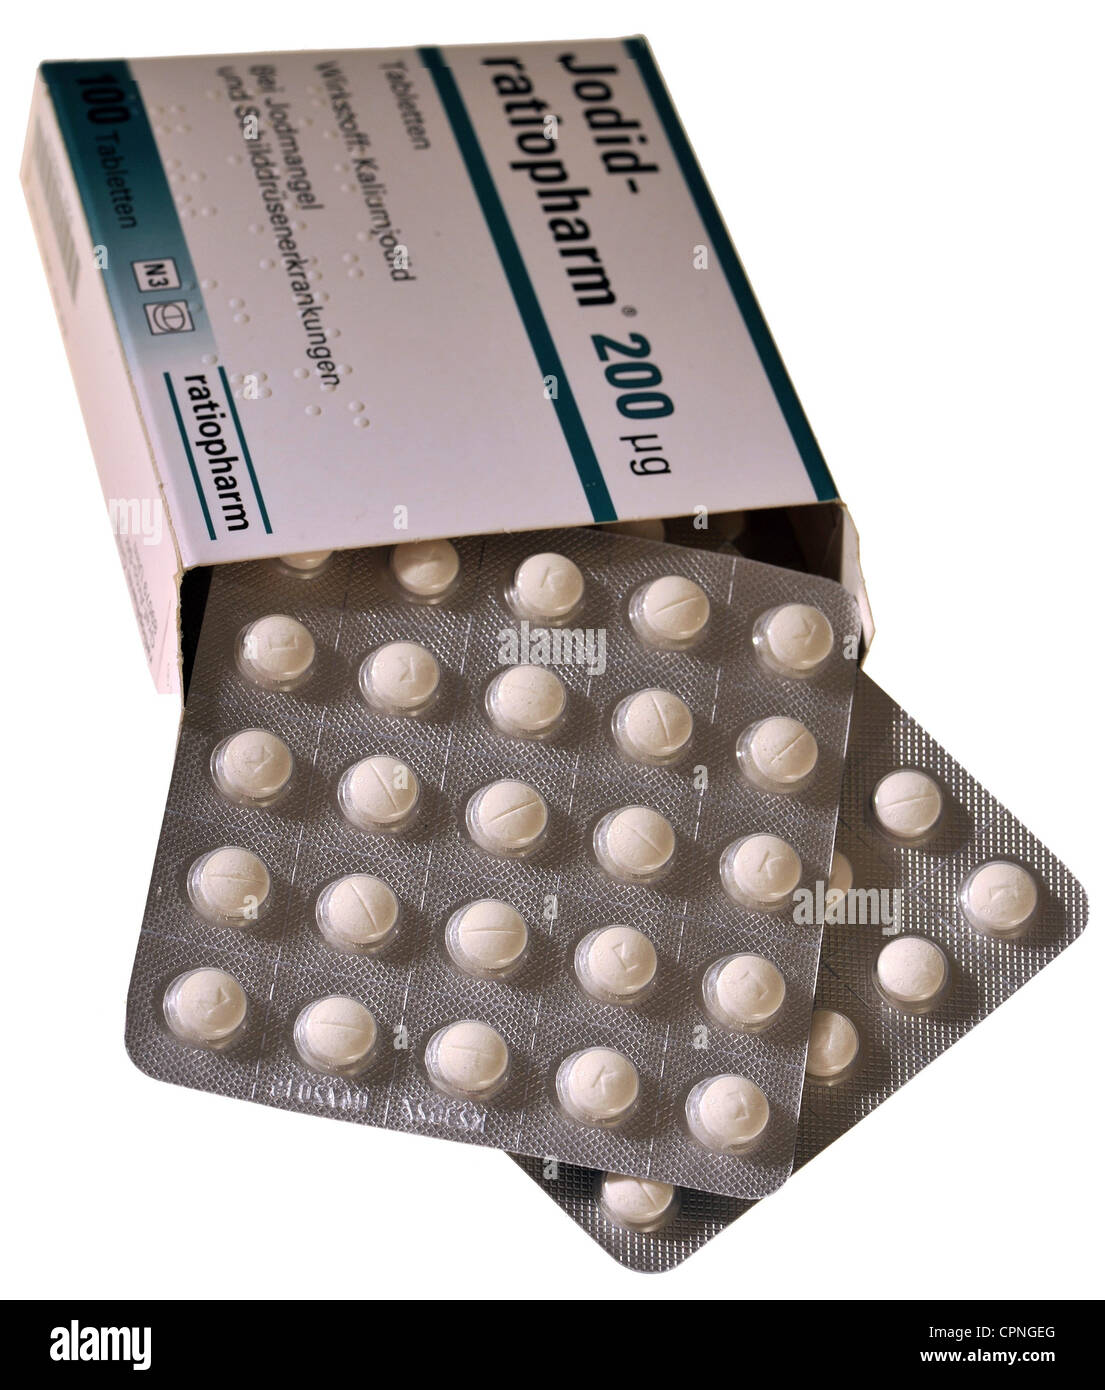 medicine,medicinal drug,iodine tablets,against iodine deficiency and thyroid disorder,Jodid ratiopharm 200,Germany,2011,blister pack,clipping,cut out,cut-out,cut-outs,still,pharmaceuticals,pharmaceutical products,remedies,natural remedy,pharmaceutical,medicinal drug,medicament,medication,pharmacon,pharmacons,troche,iodine,worst case scenario,maximum credible accident,MCA,atomic age,packet,pack,packing,packings,pill,tablet,pills,tablets,product,products,historic,historical,radioactivity,level of contamination,radioactiv,Additional-Rights-Clearences-Not Available Stock Photo